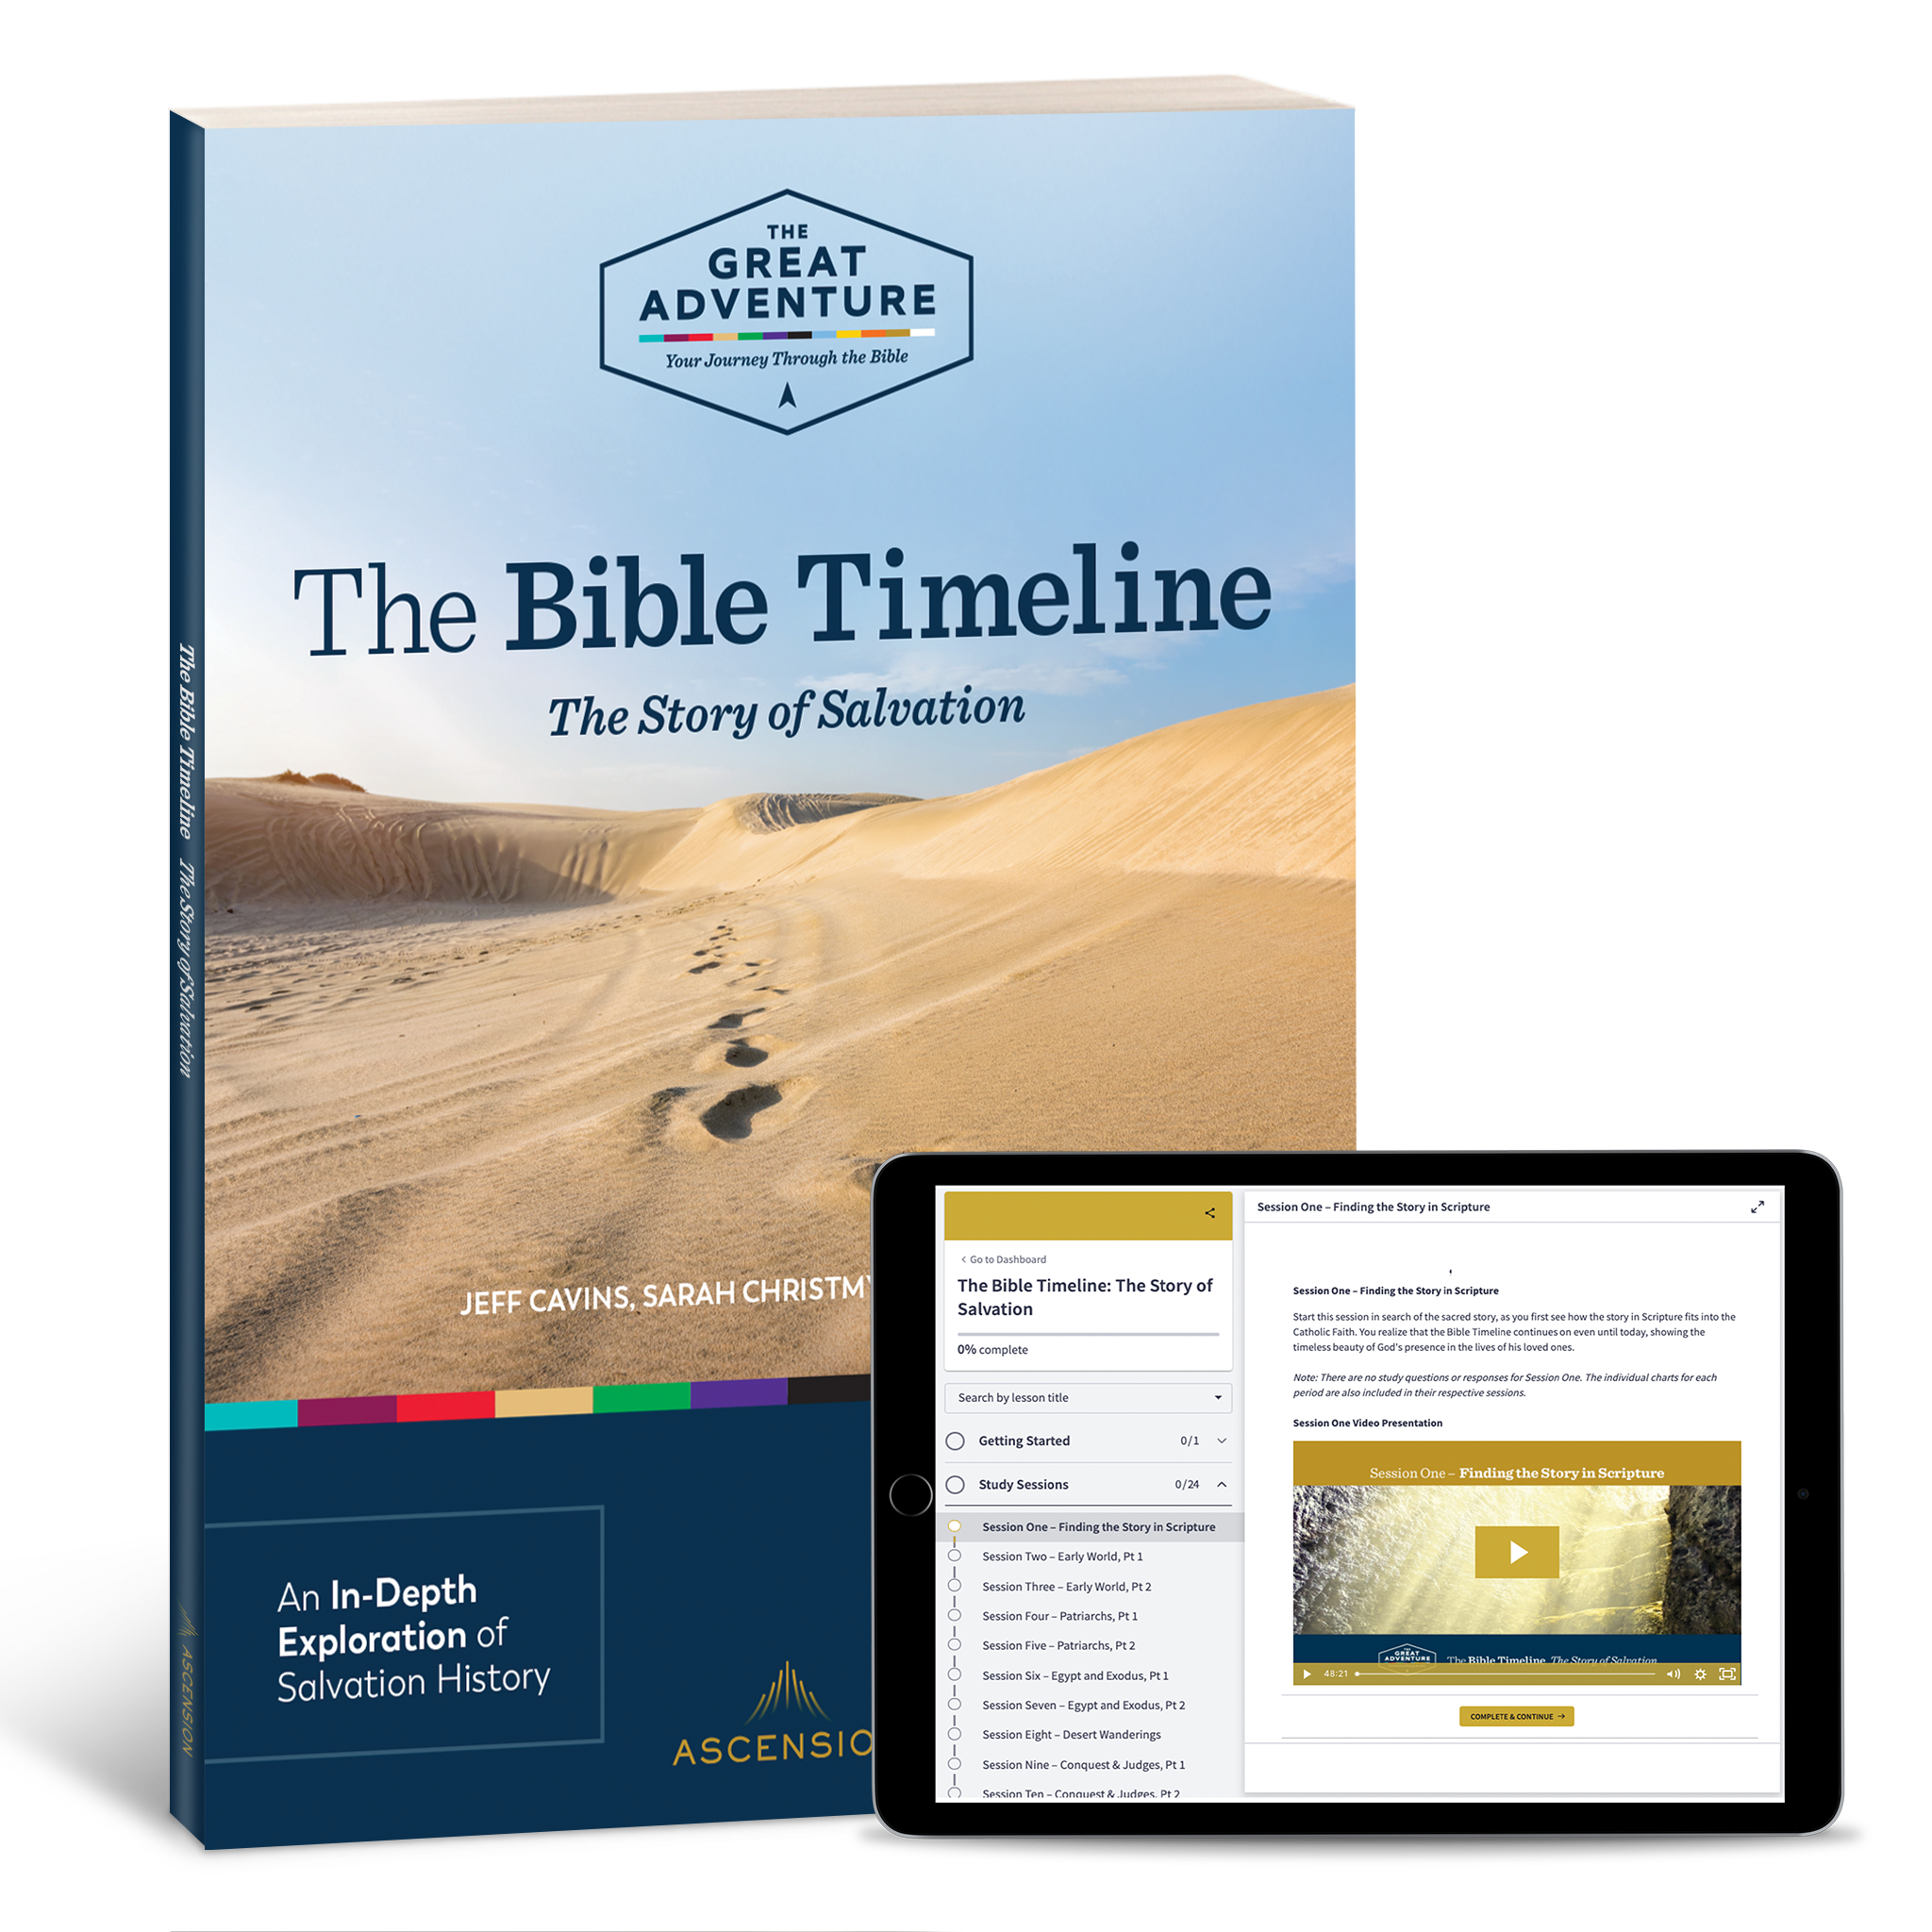 The Gospel Project for Kids: Small Group Timeline and Map Set | Lifeway